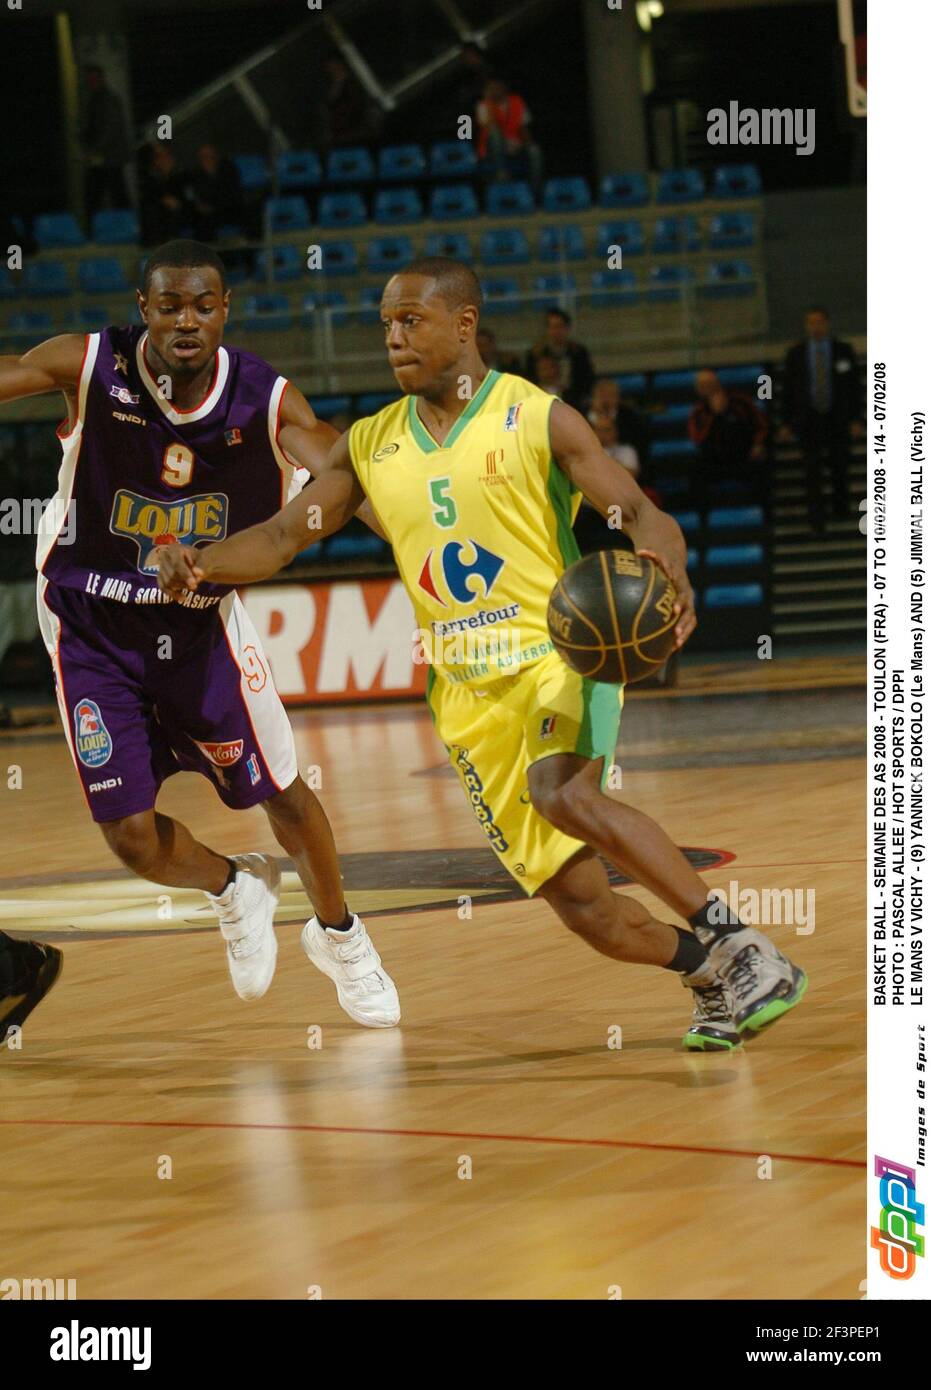 BASKET BALL - SEMAINE DES AS 2008 - TOULON (FRA) - 07 TO 10/02/2008 - 1/4 -  07/02/08 PHOTO : PASCAL ALLEE / HOT SPORTS / DPPI LE MANS V VICHY - (9)  YANNICK BOKOLO (Le Mans) AND (5) JIMMAL BALL (Vichy Stock Photo - Alamy